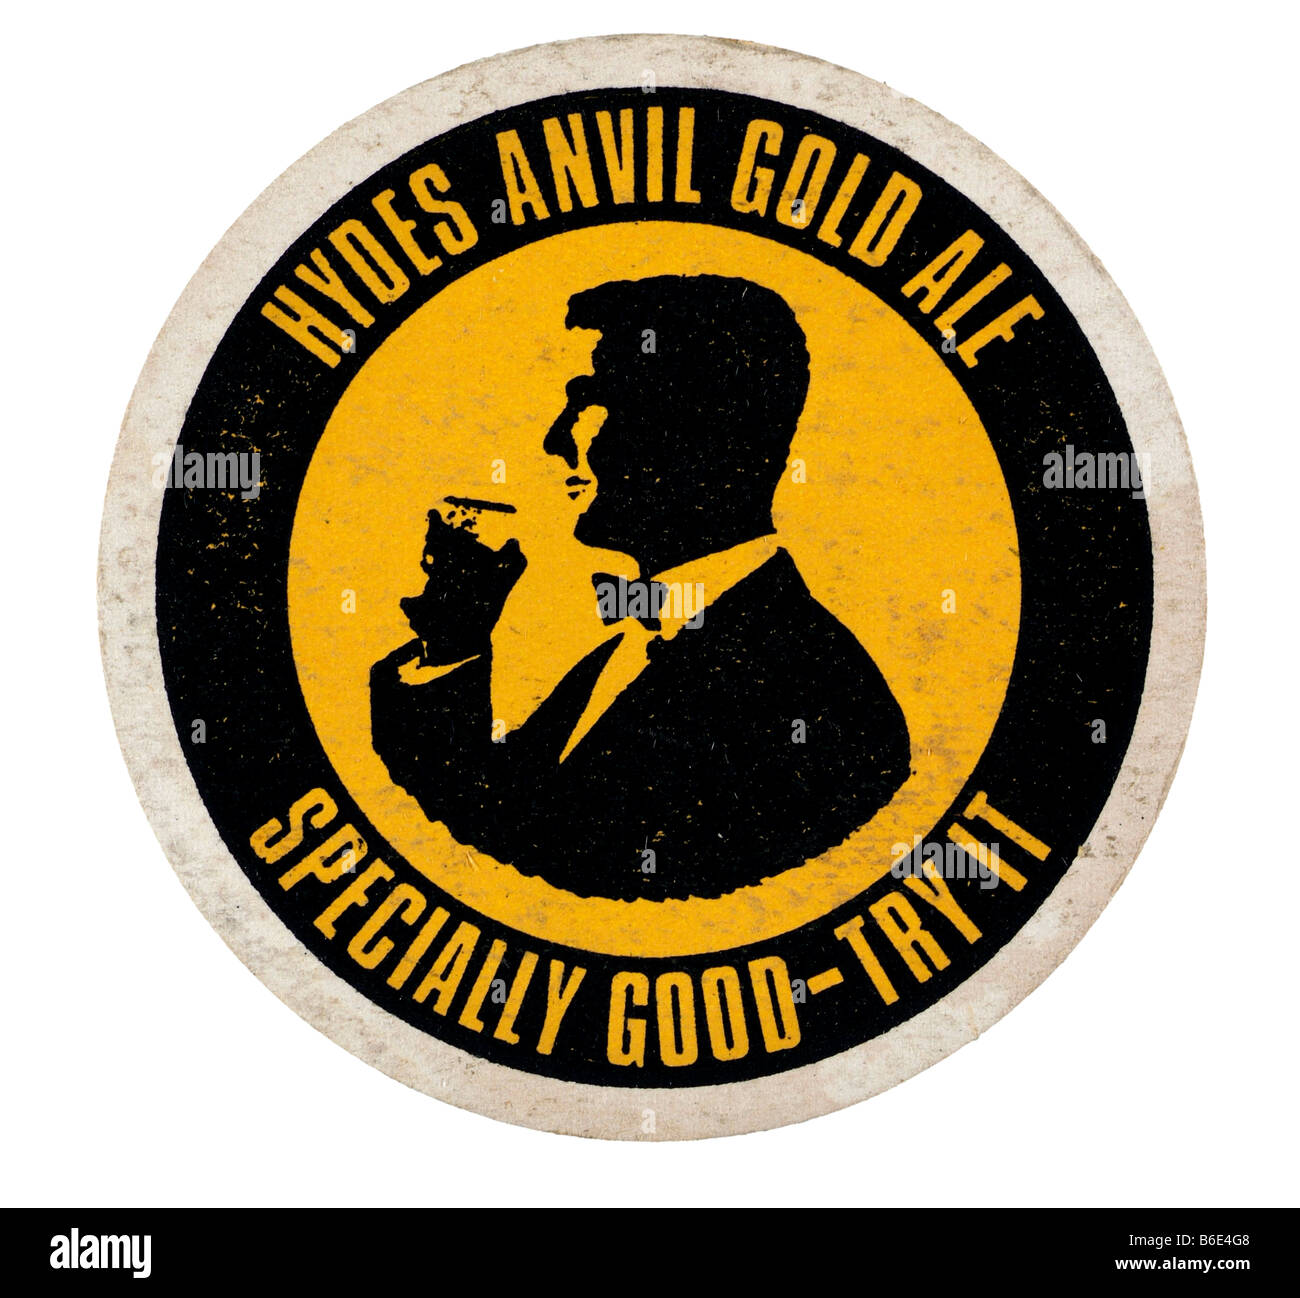 hydes anvil gold ale specially good try it Stock Photo